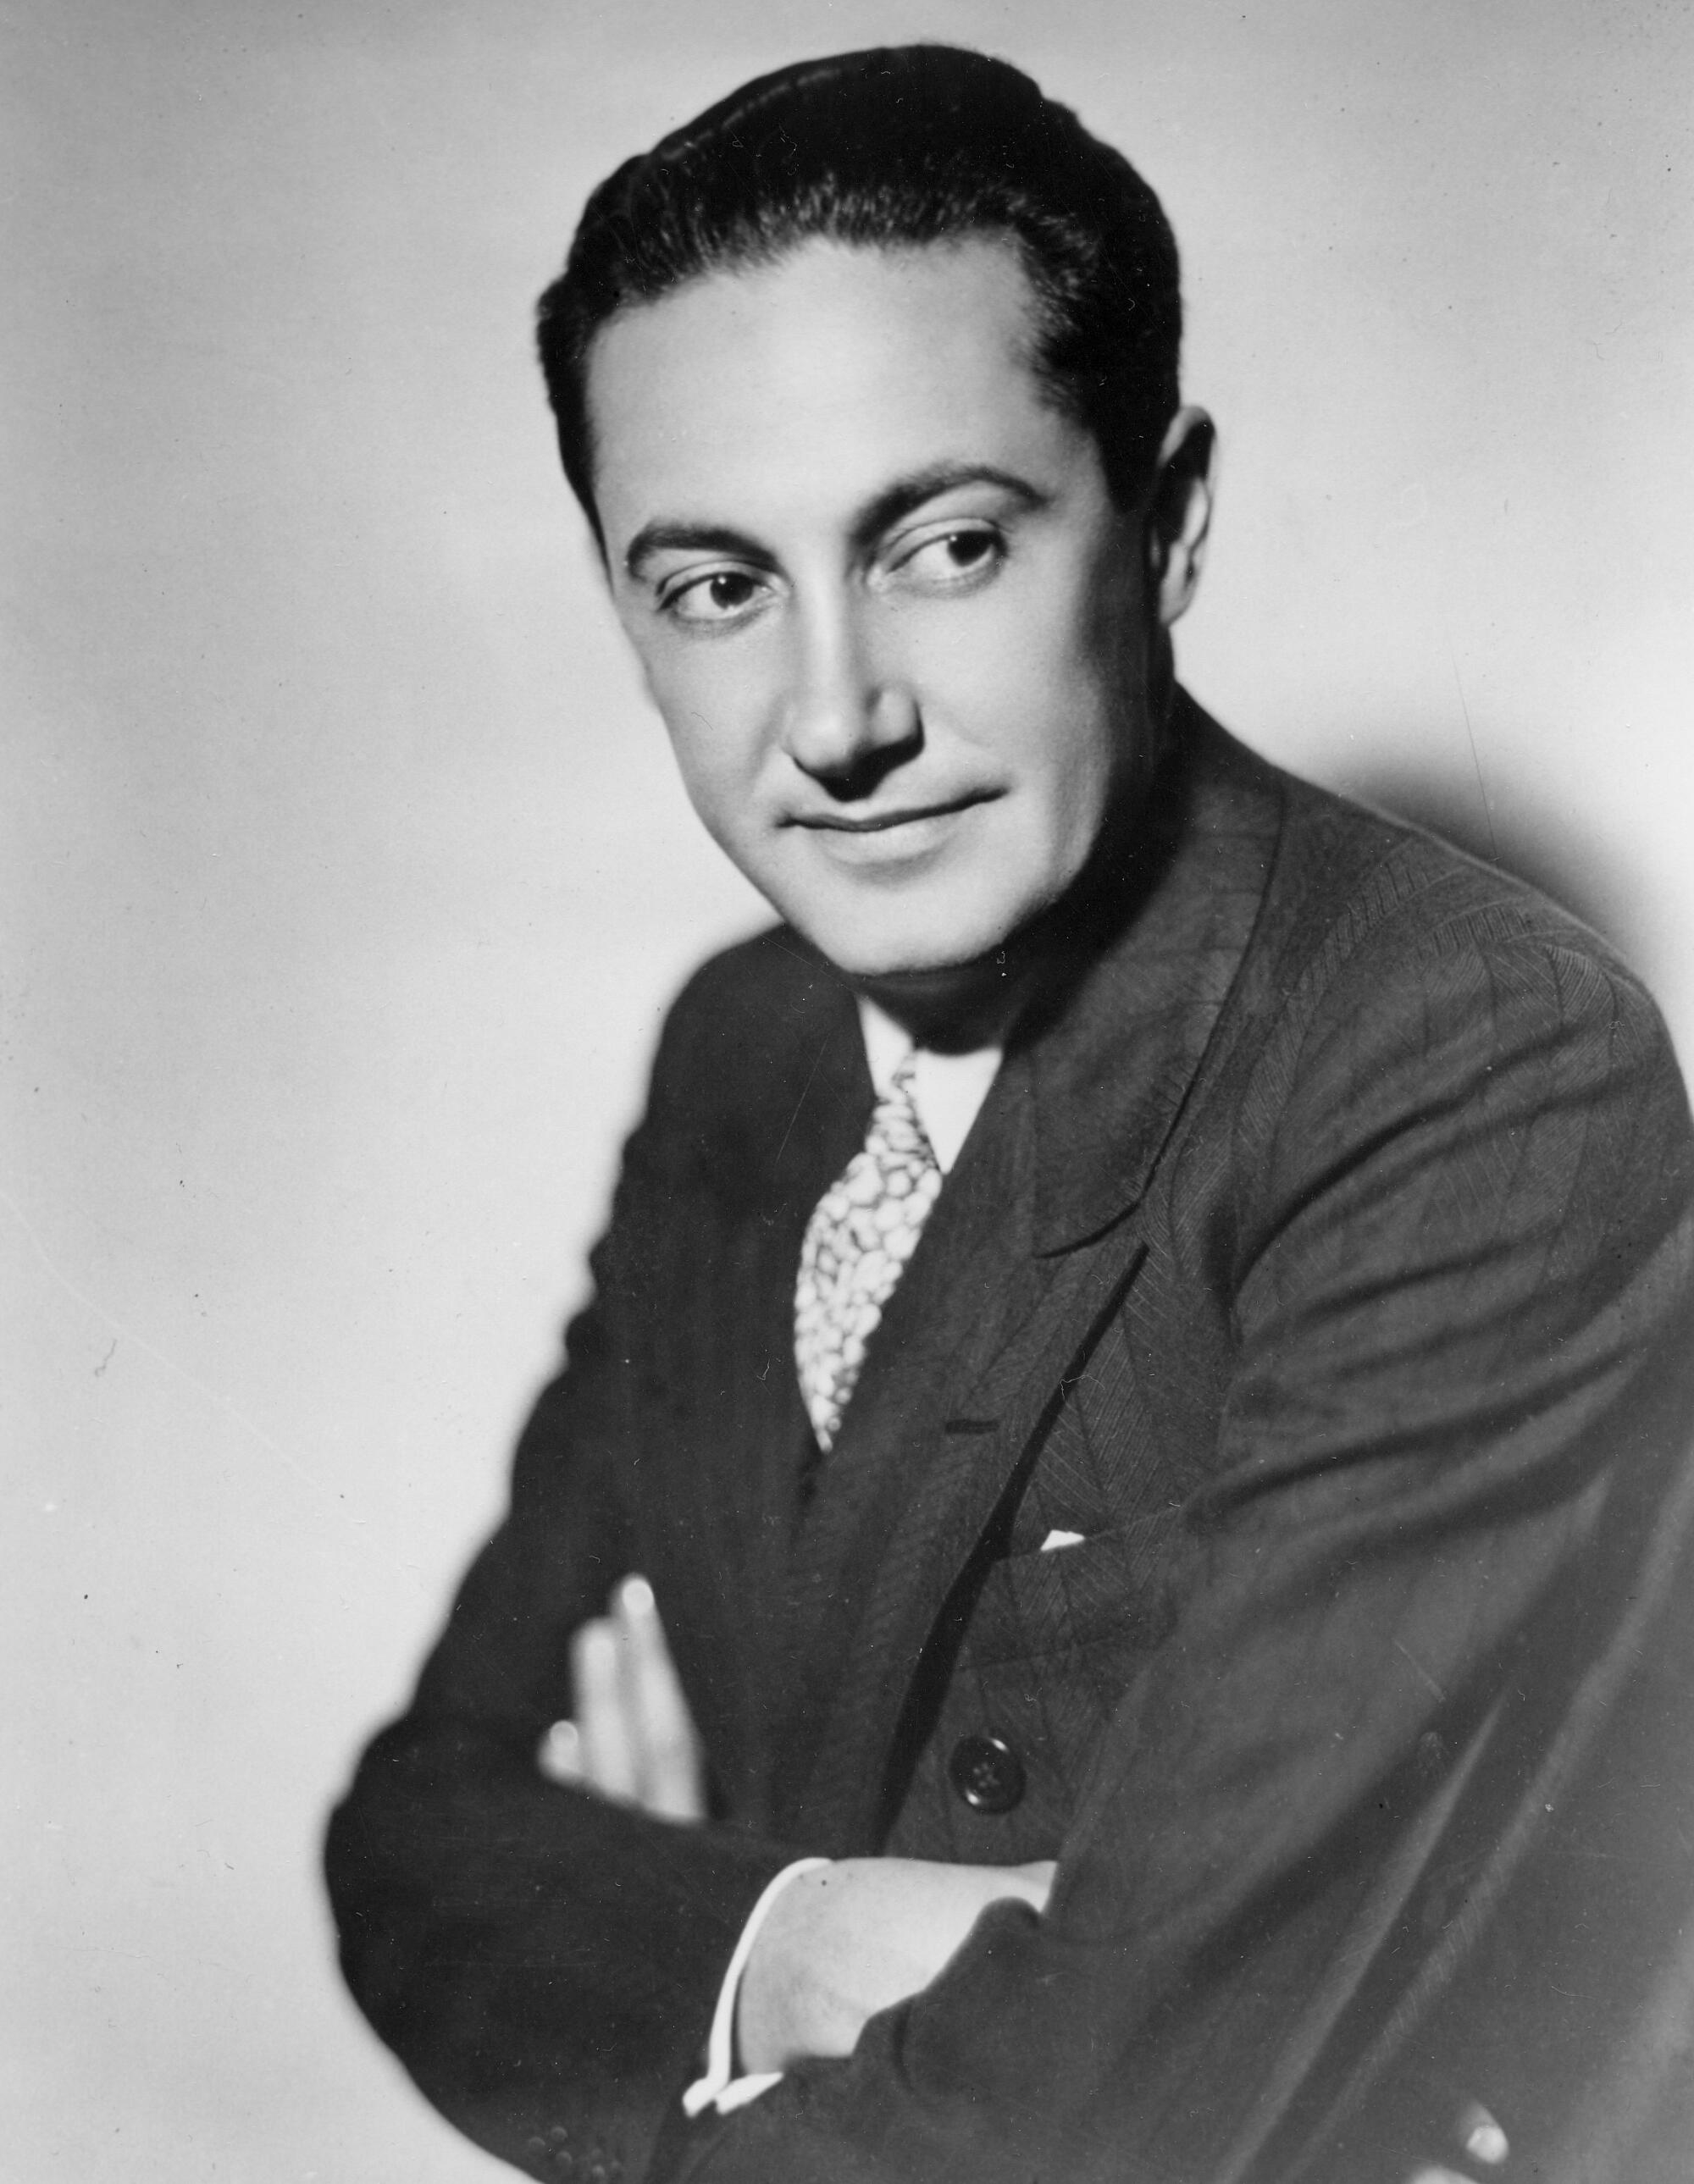 Irving Thalberg with his arms crossed